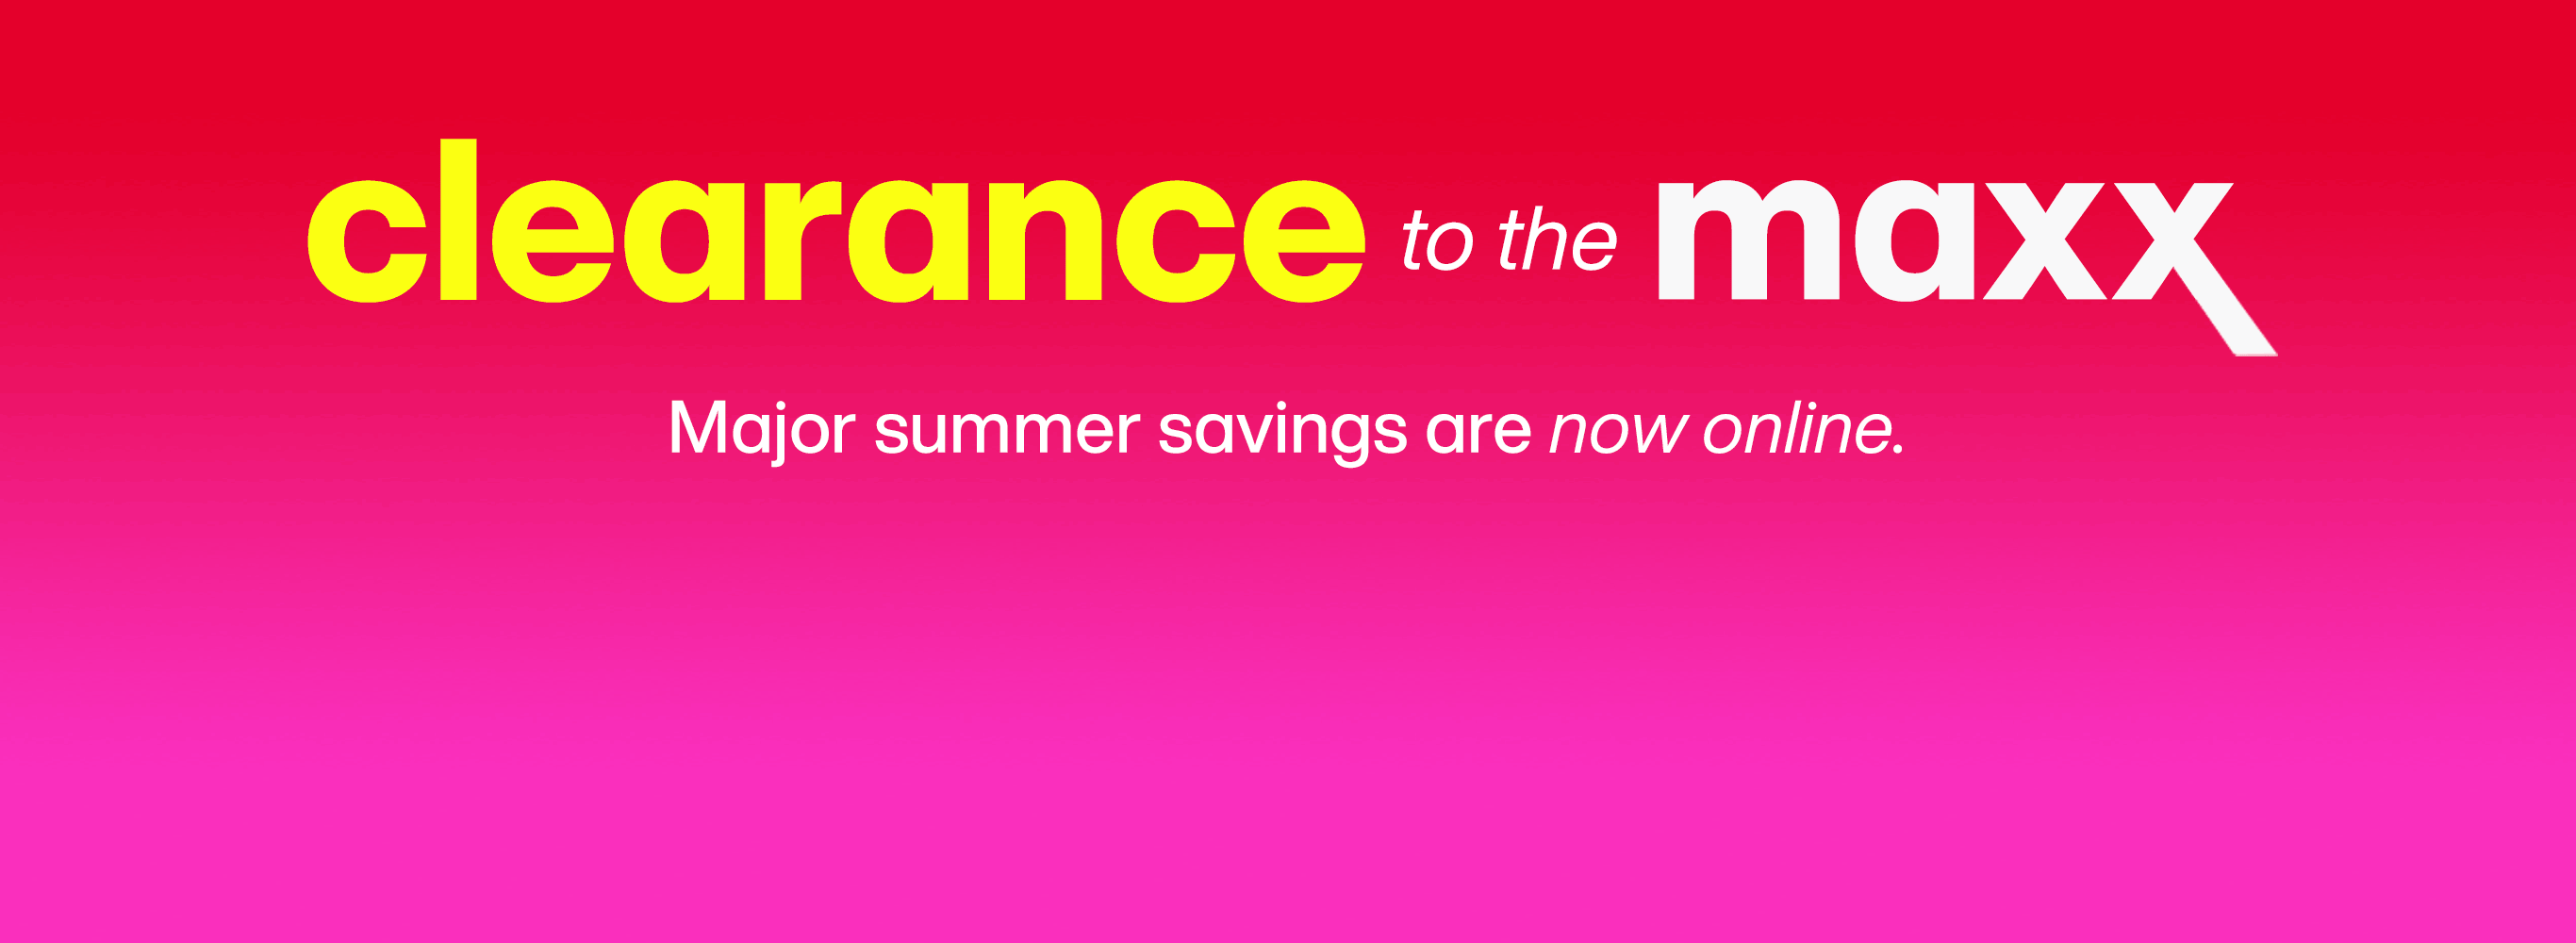 Clearance to the maxx. Major summer savings are now online.